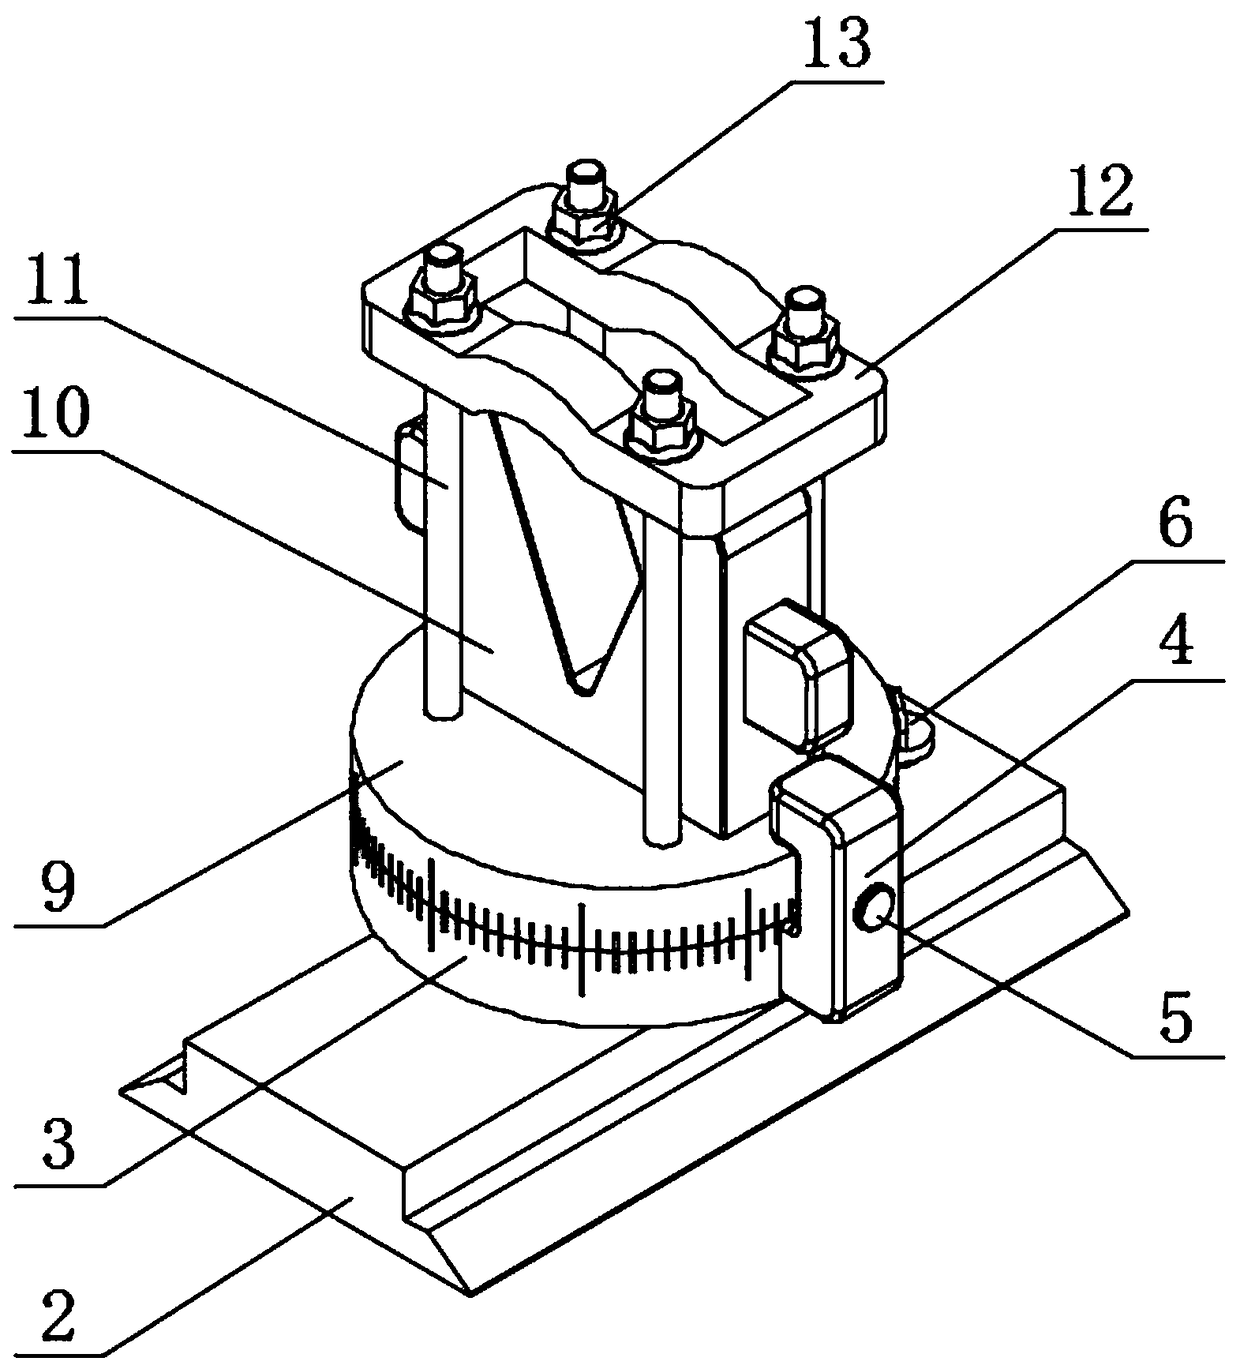 Mechanical positioning device for corner connecting pipe welding